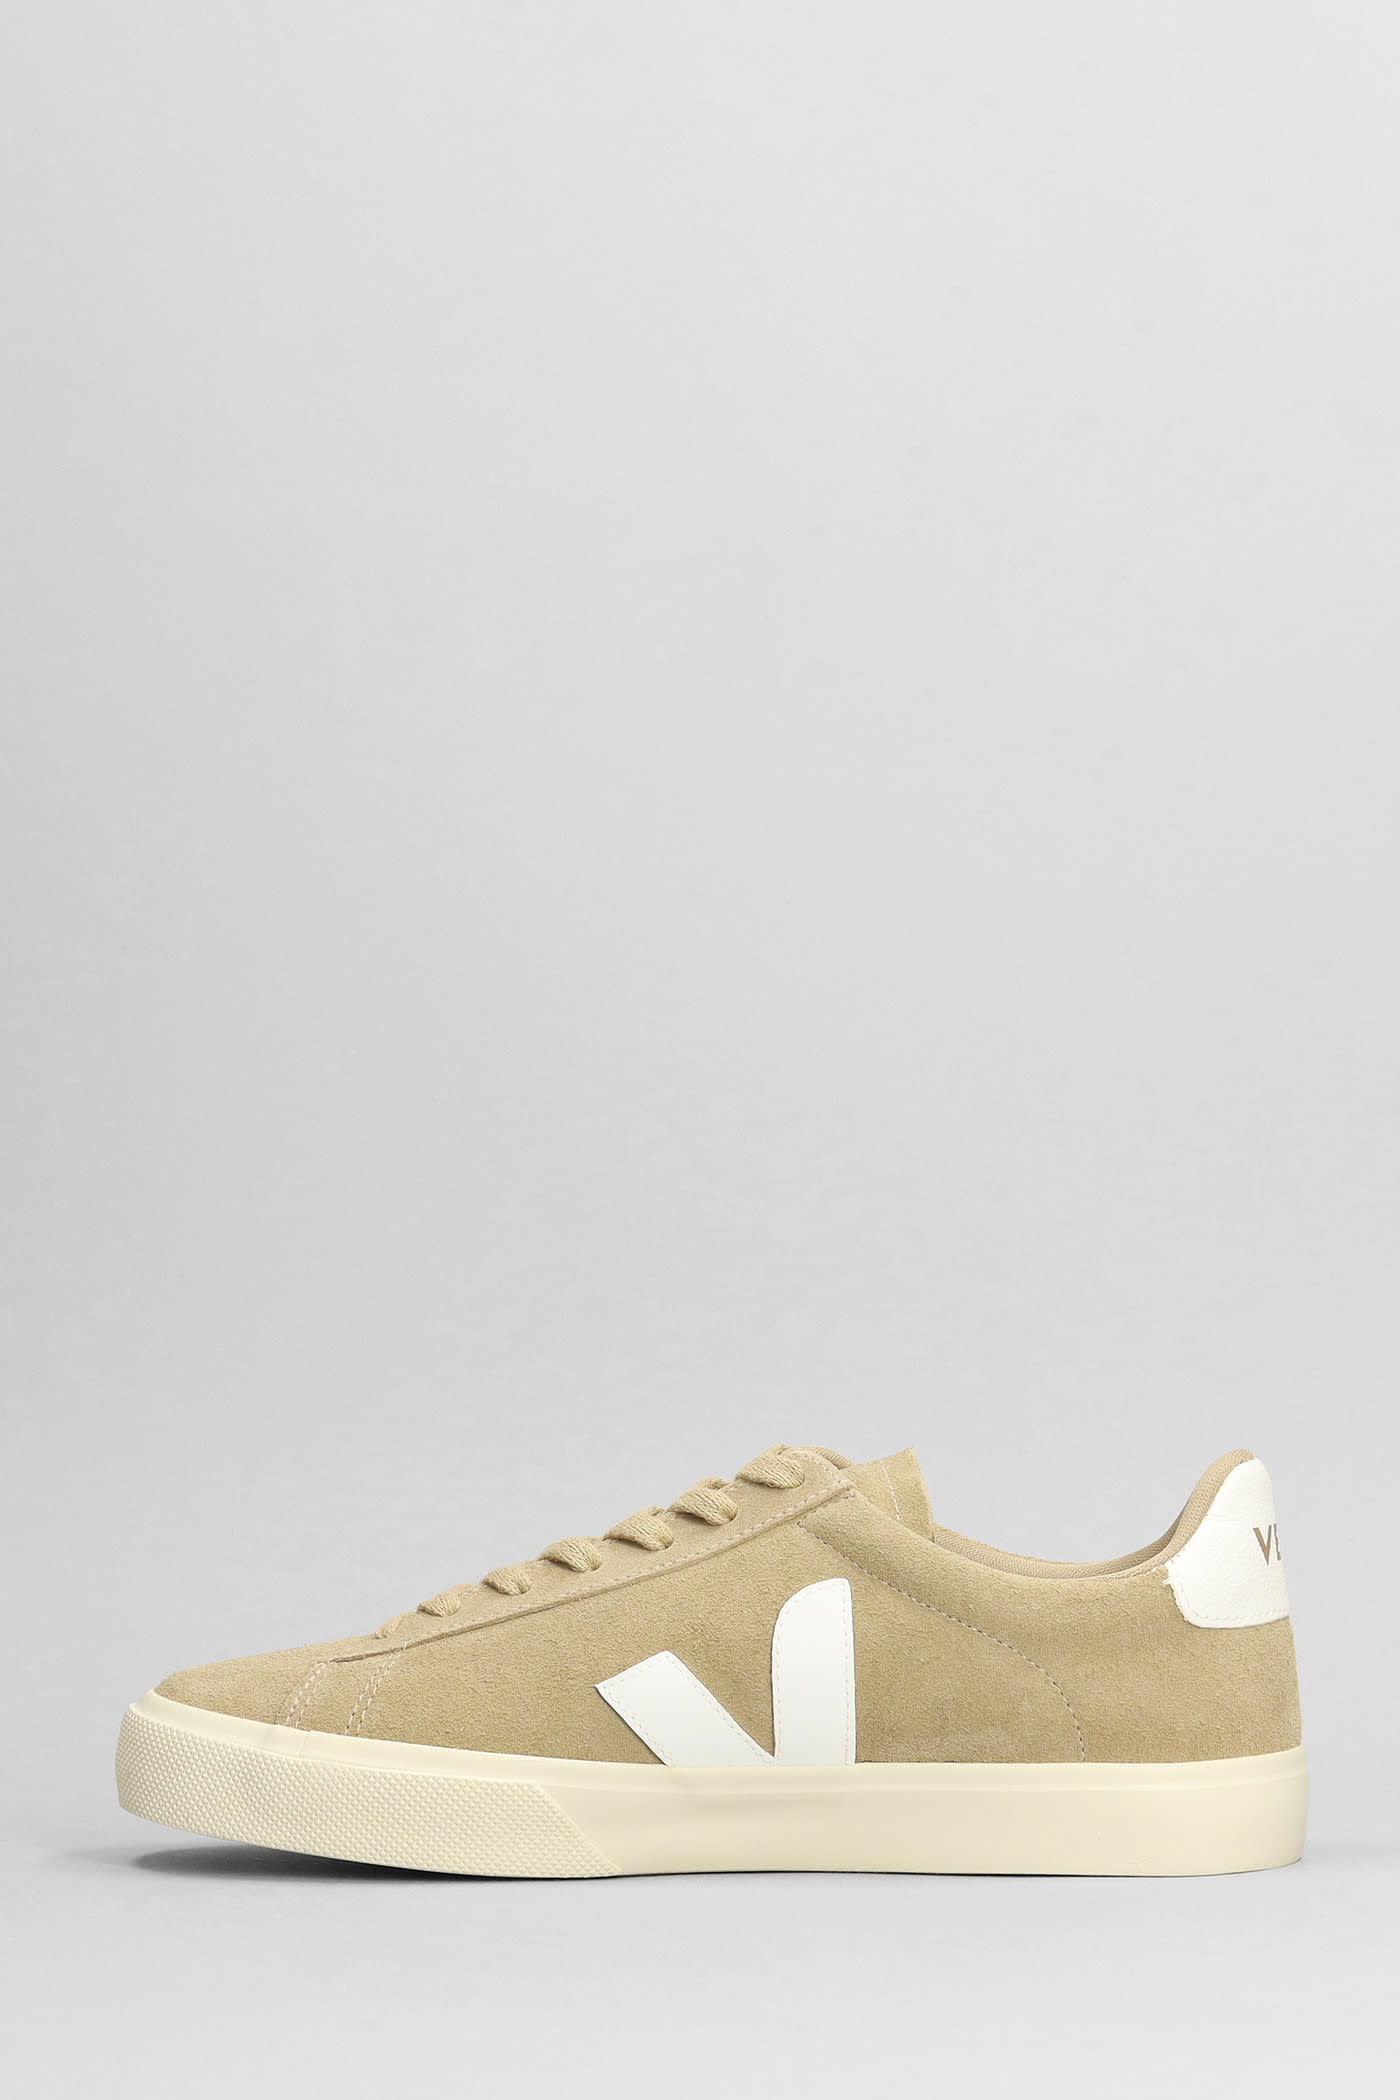 Veja Campo Suede Sneakers In Camel Suede スニーカー-